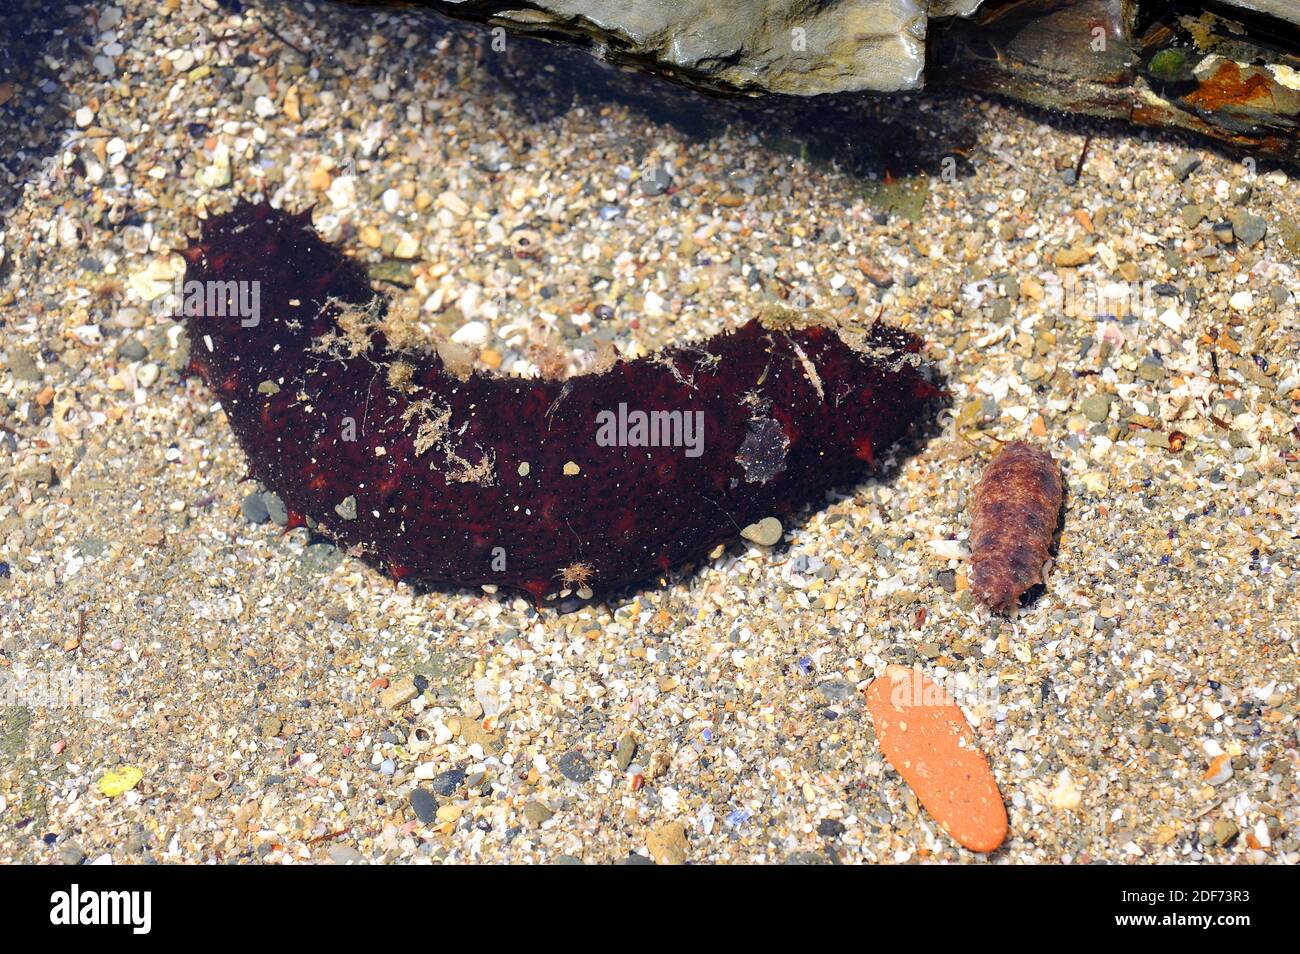 Tubular sea cucumber (Holothuria tubulosa) is a species of sea cucumber feeds on detritus and plankton. Adult and young specimens. This photo was Stock Photo